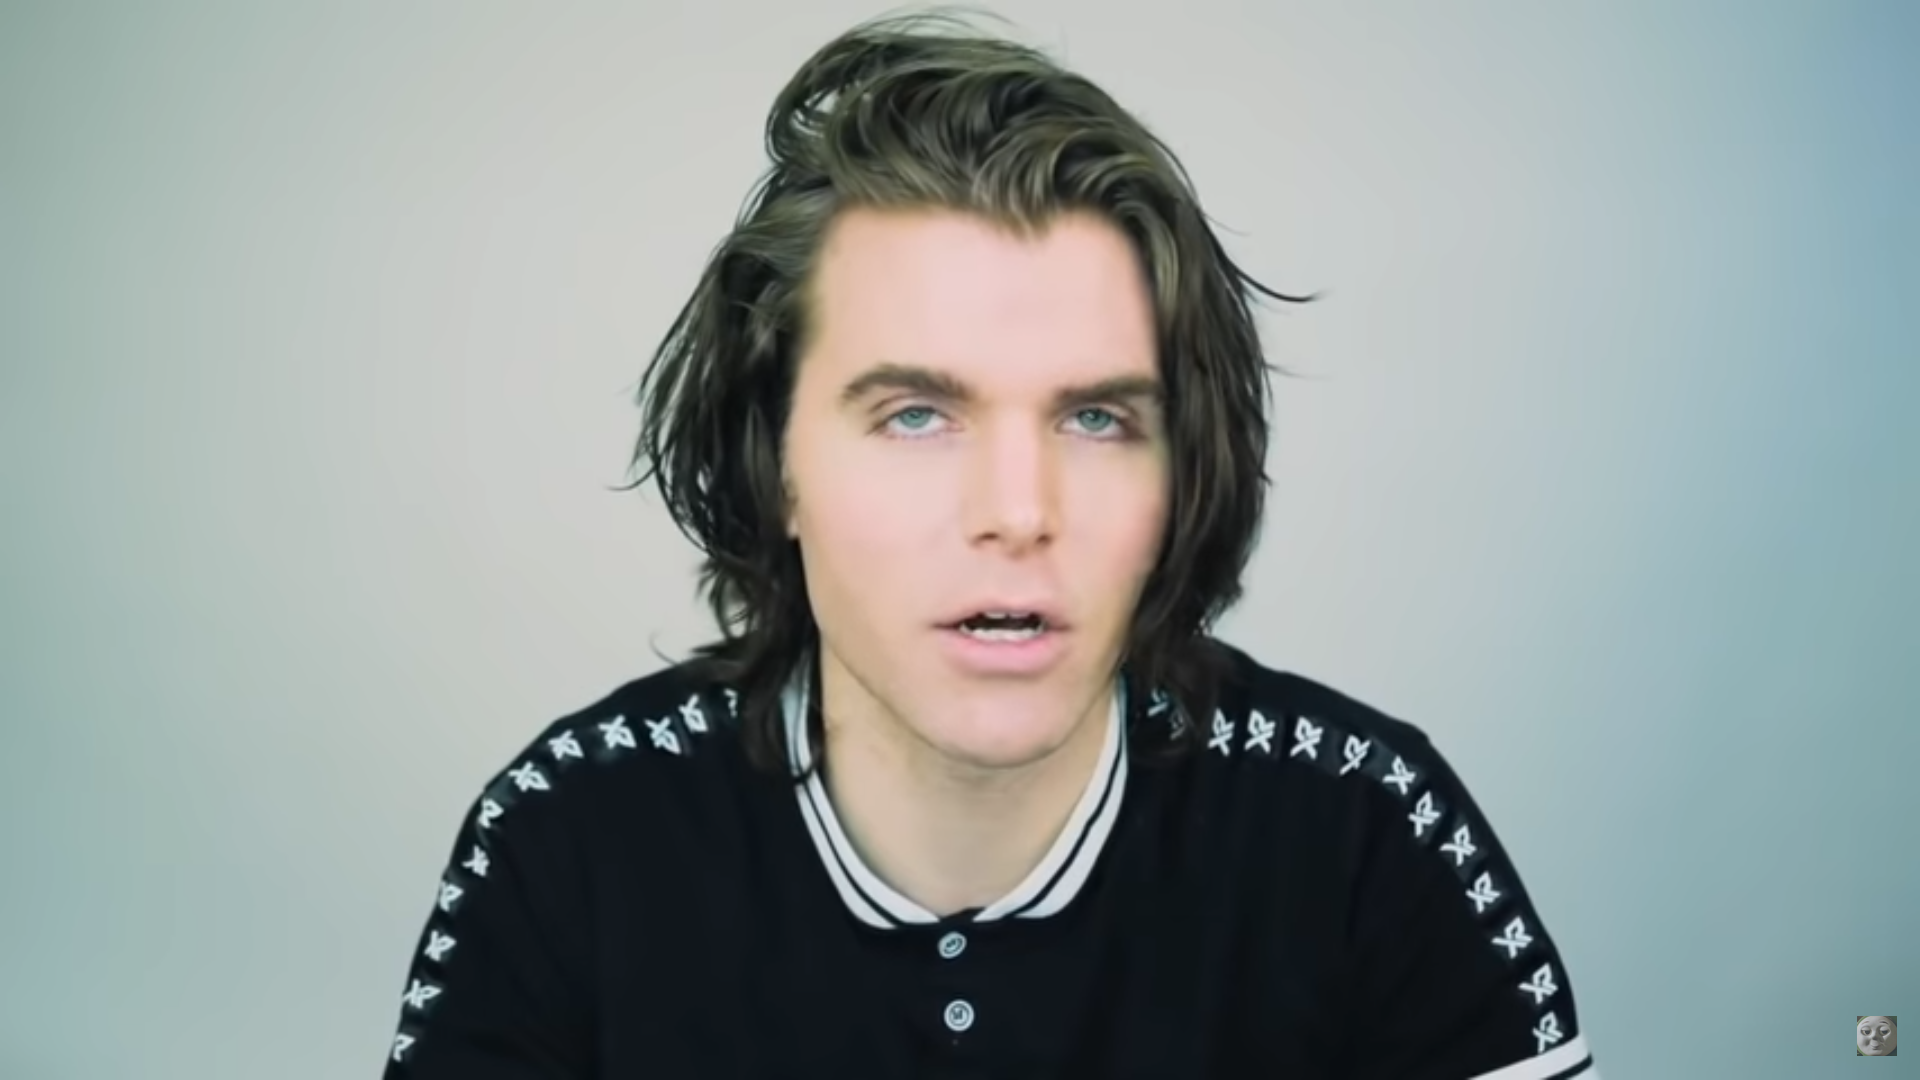 Does onision many kids have how 